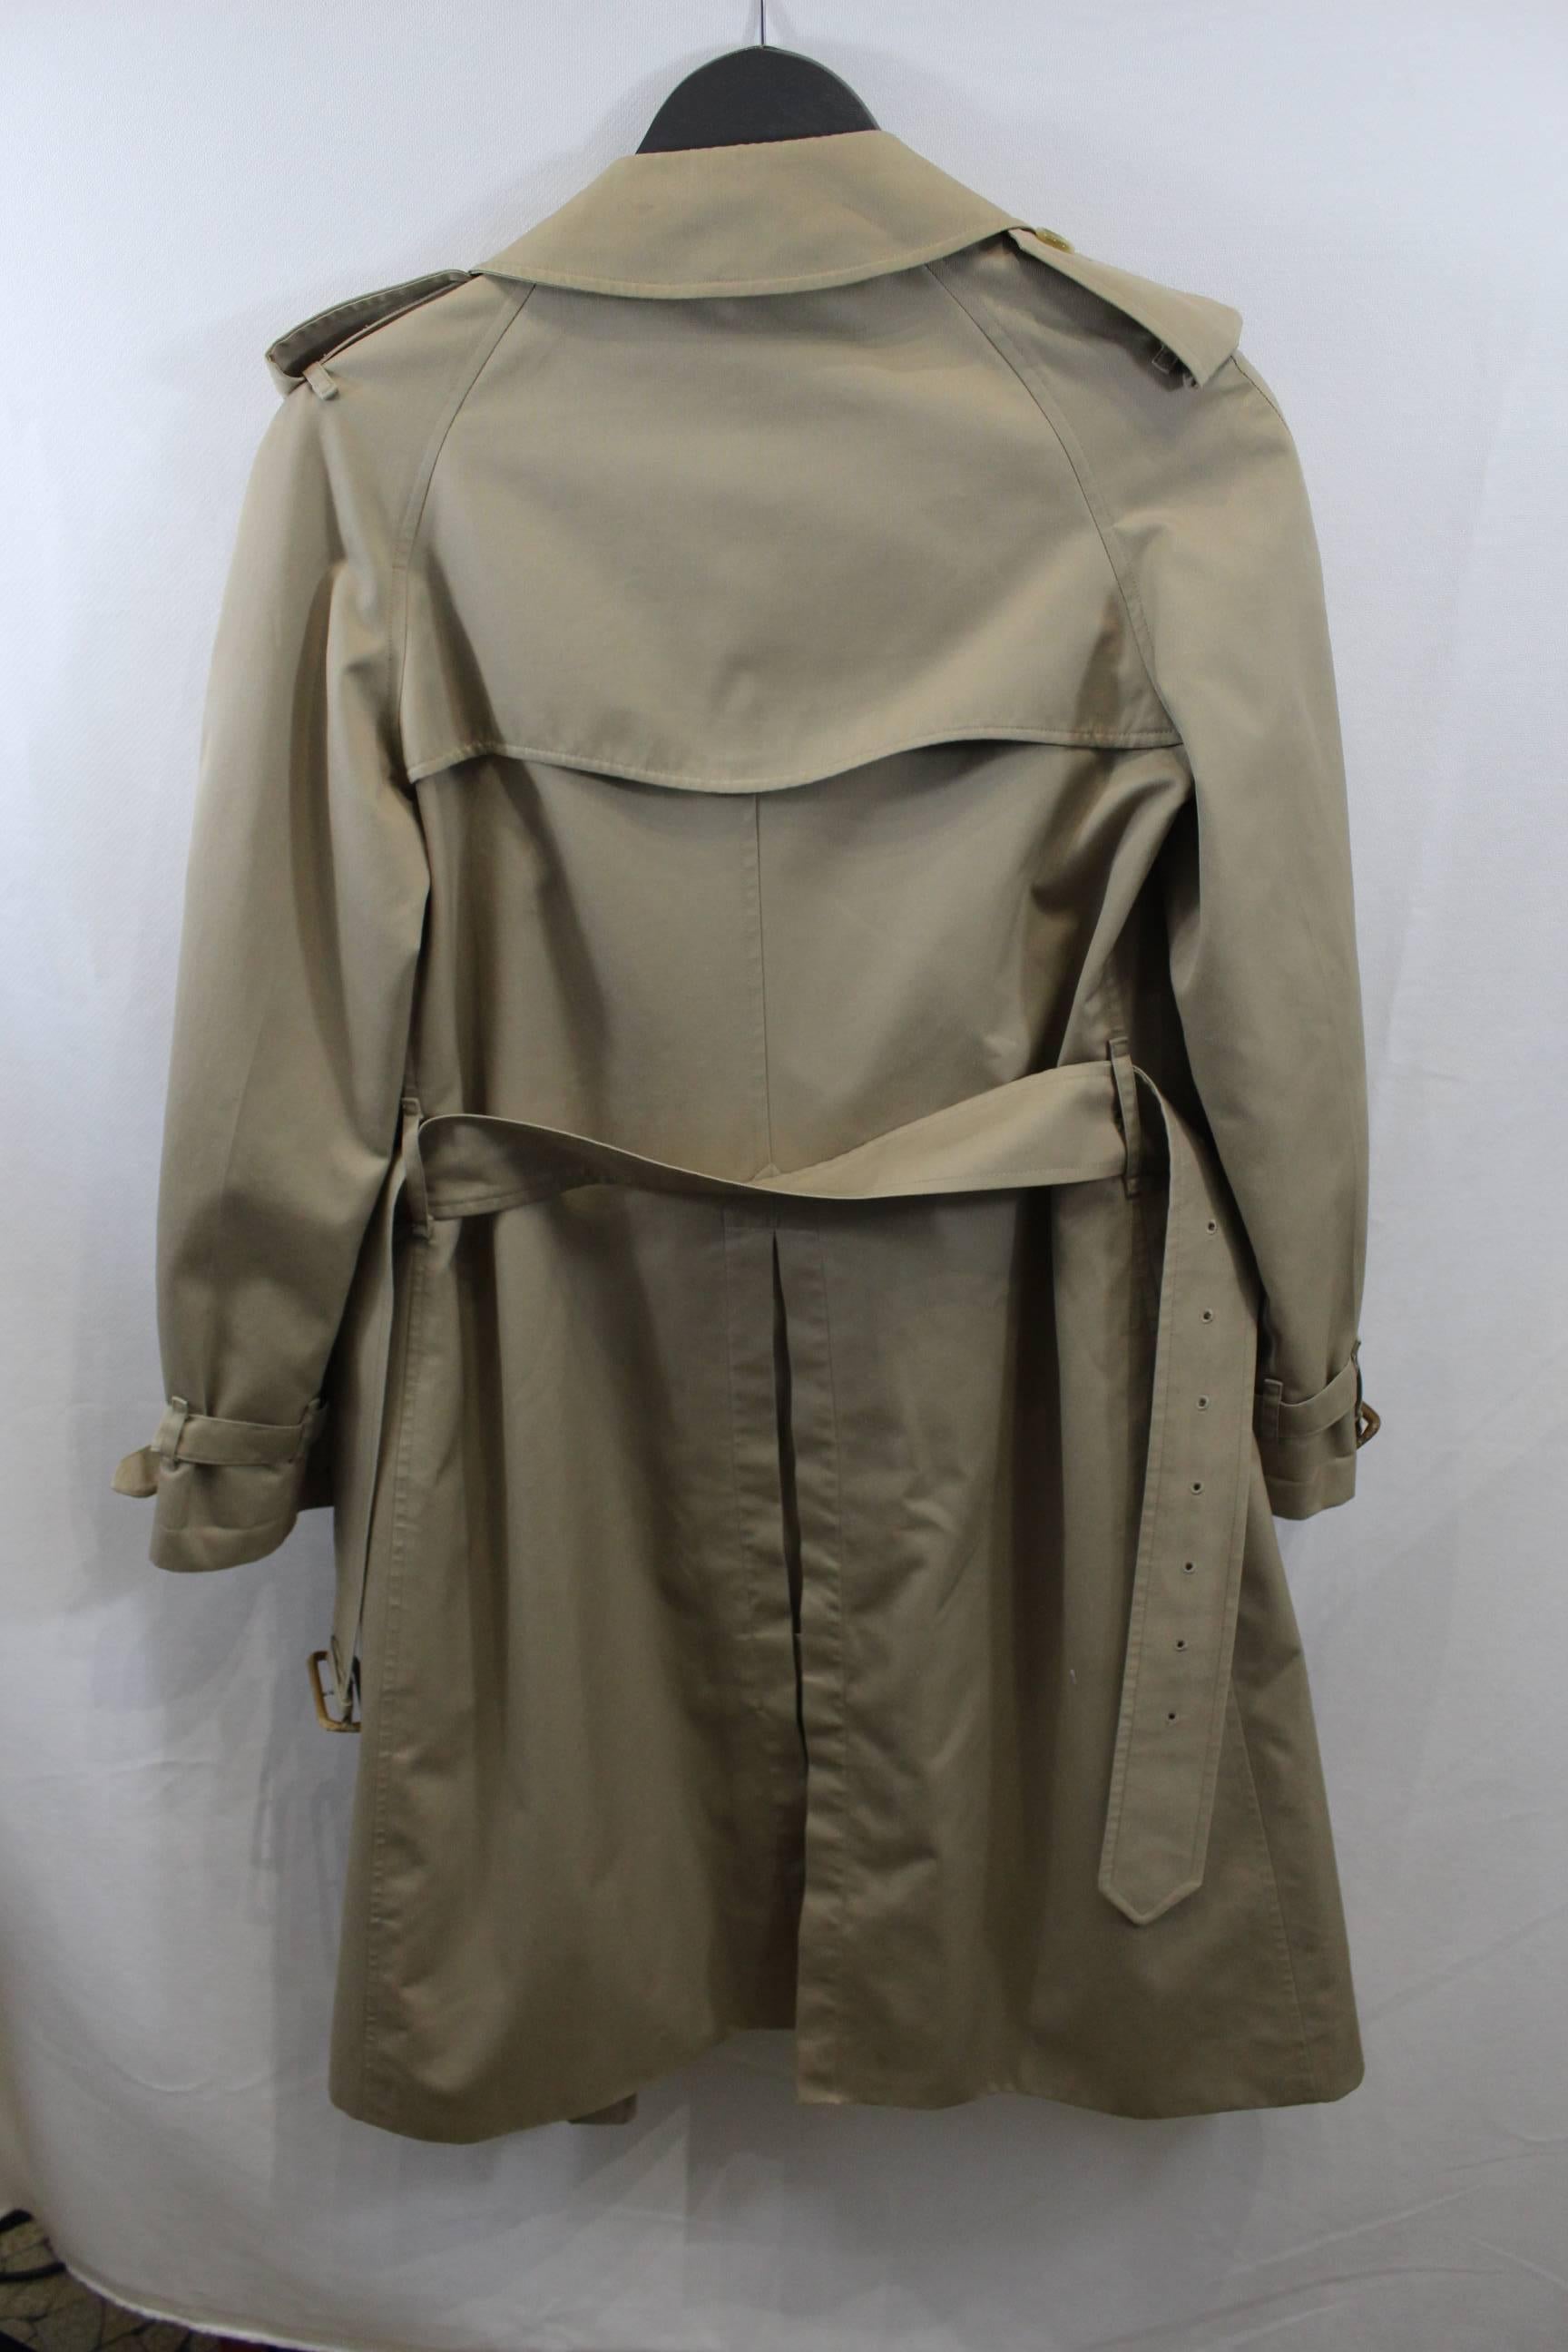 Really nice Burberry vintage raincoat in good condition ( just came out from dry cleaning) Just some small signs of wear due to its age but nothing noticeable. 

Just noticeable a slight use in the buckle from the belt (see last image)

Size